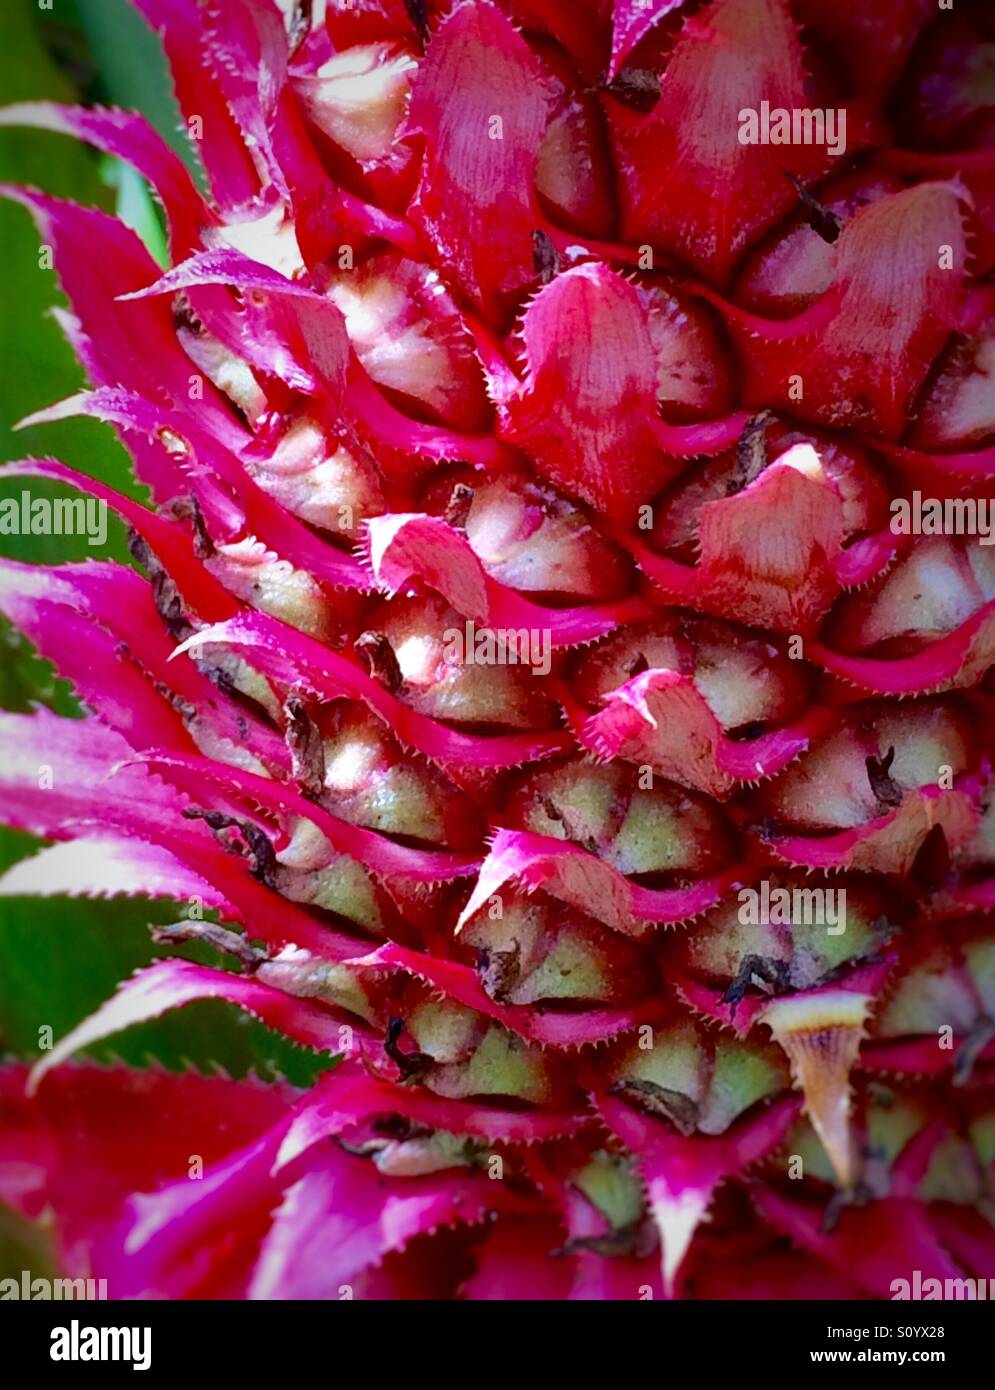 Ornamental pineapple plant close-up with abstract pattern Stock Photo